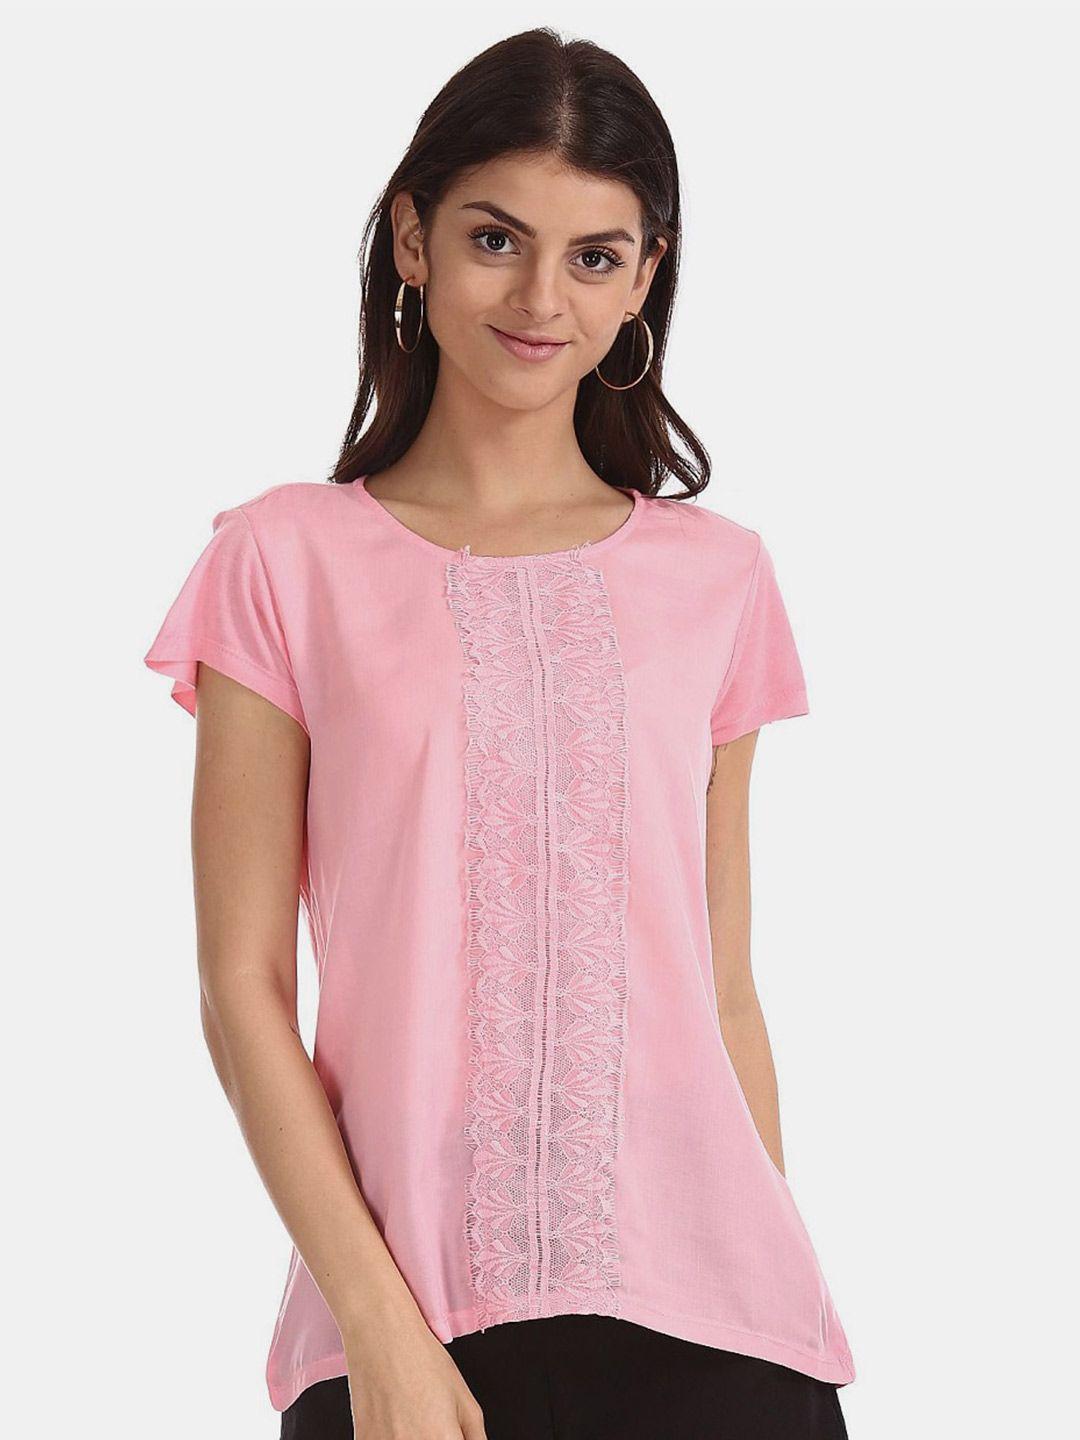 v-mart-round-neck-lace-inserts-cotton-top